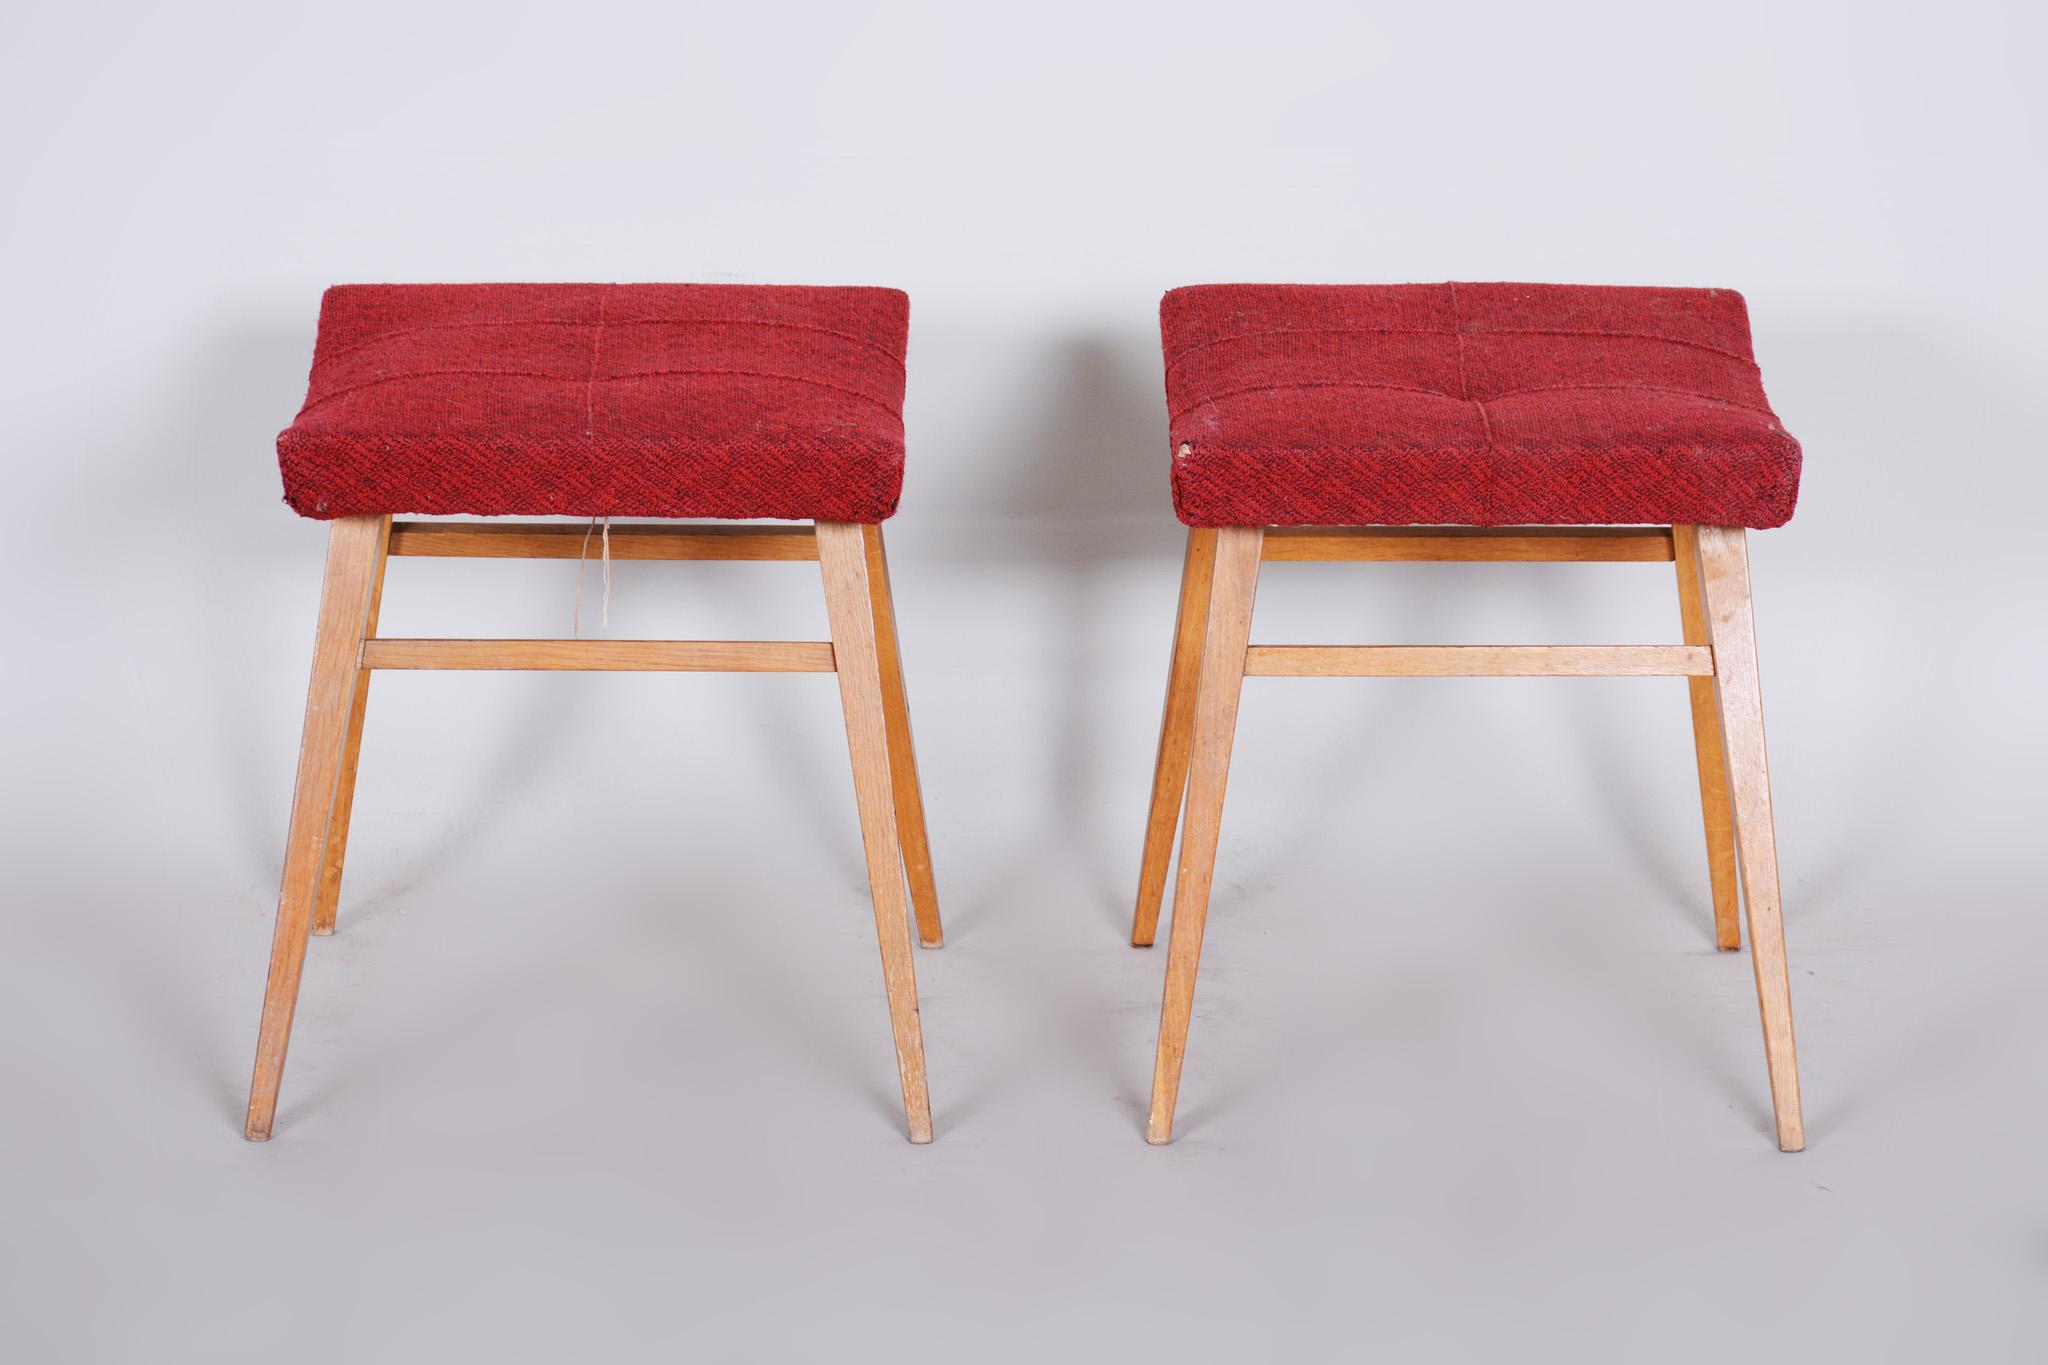 Mid-20th Century Pair of Midcentury Red Beech Stools, 1960s, Original Preserved Condition For Sale